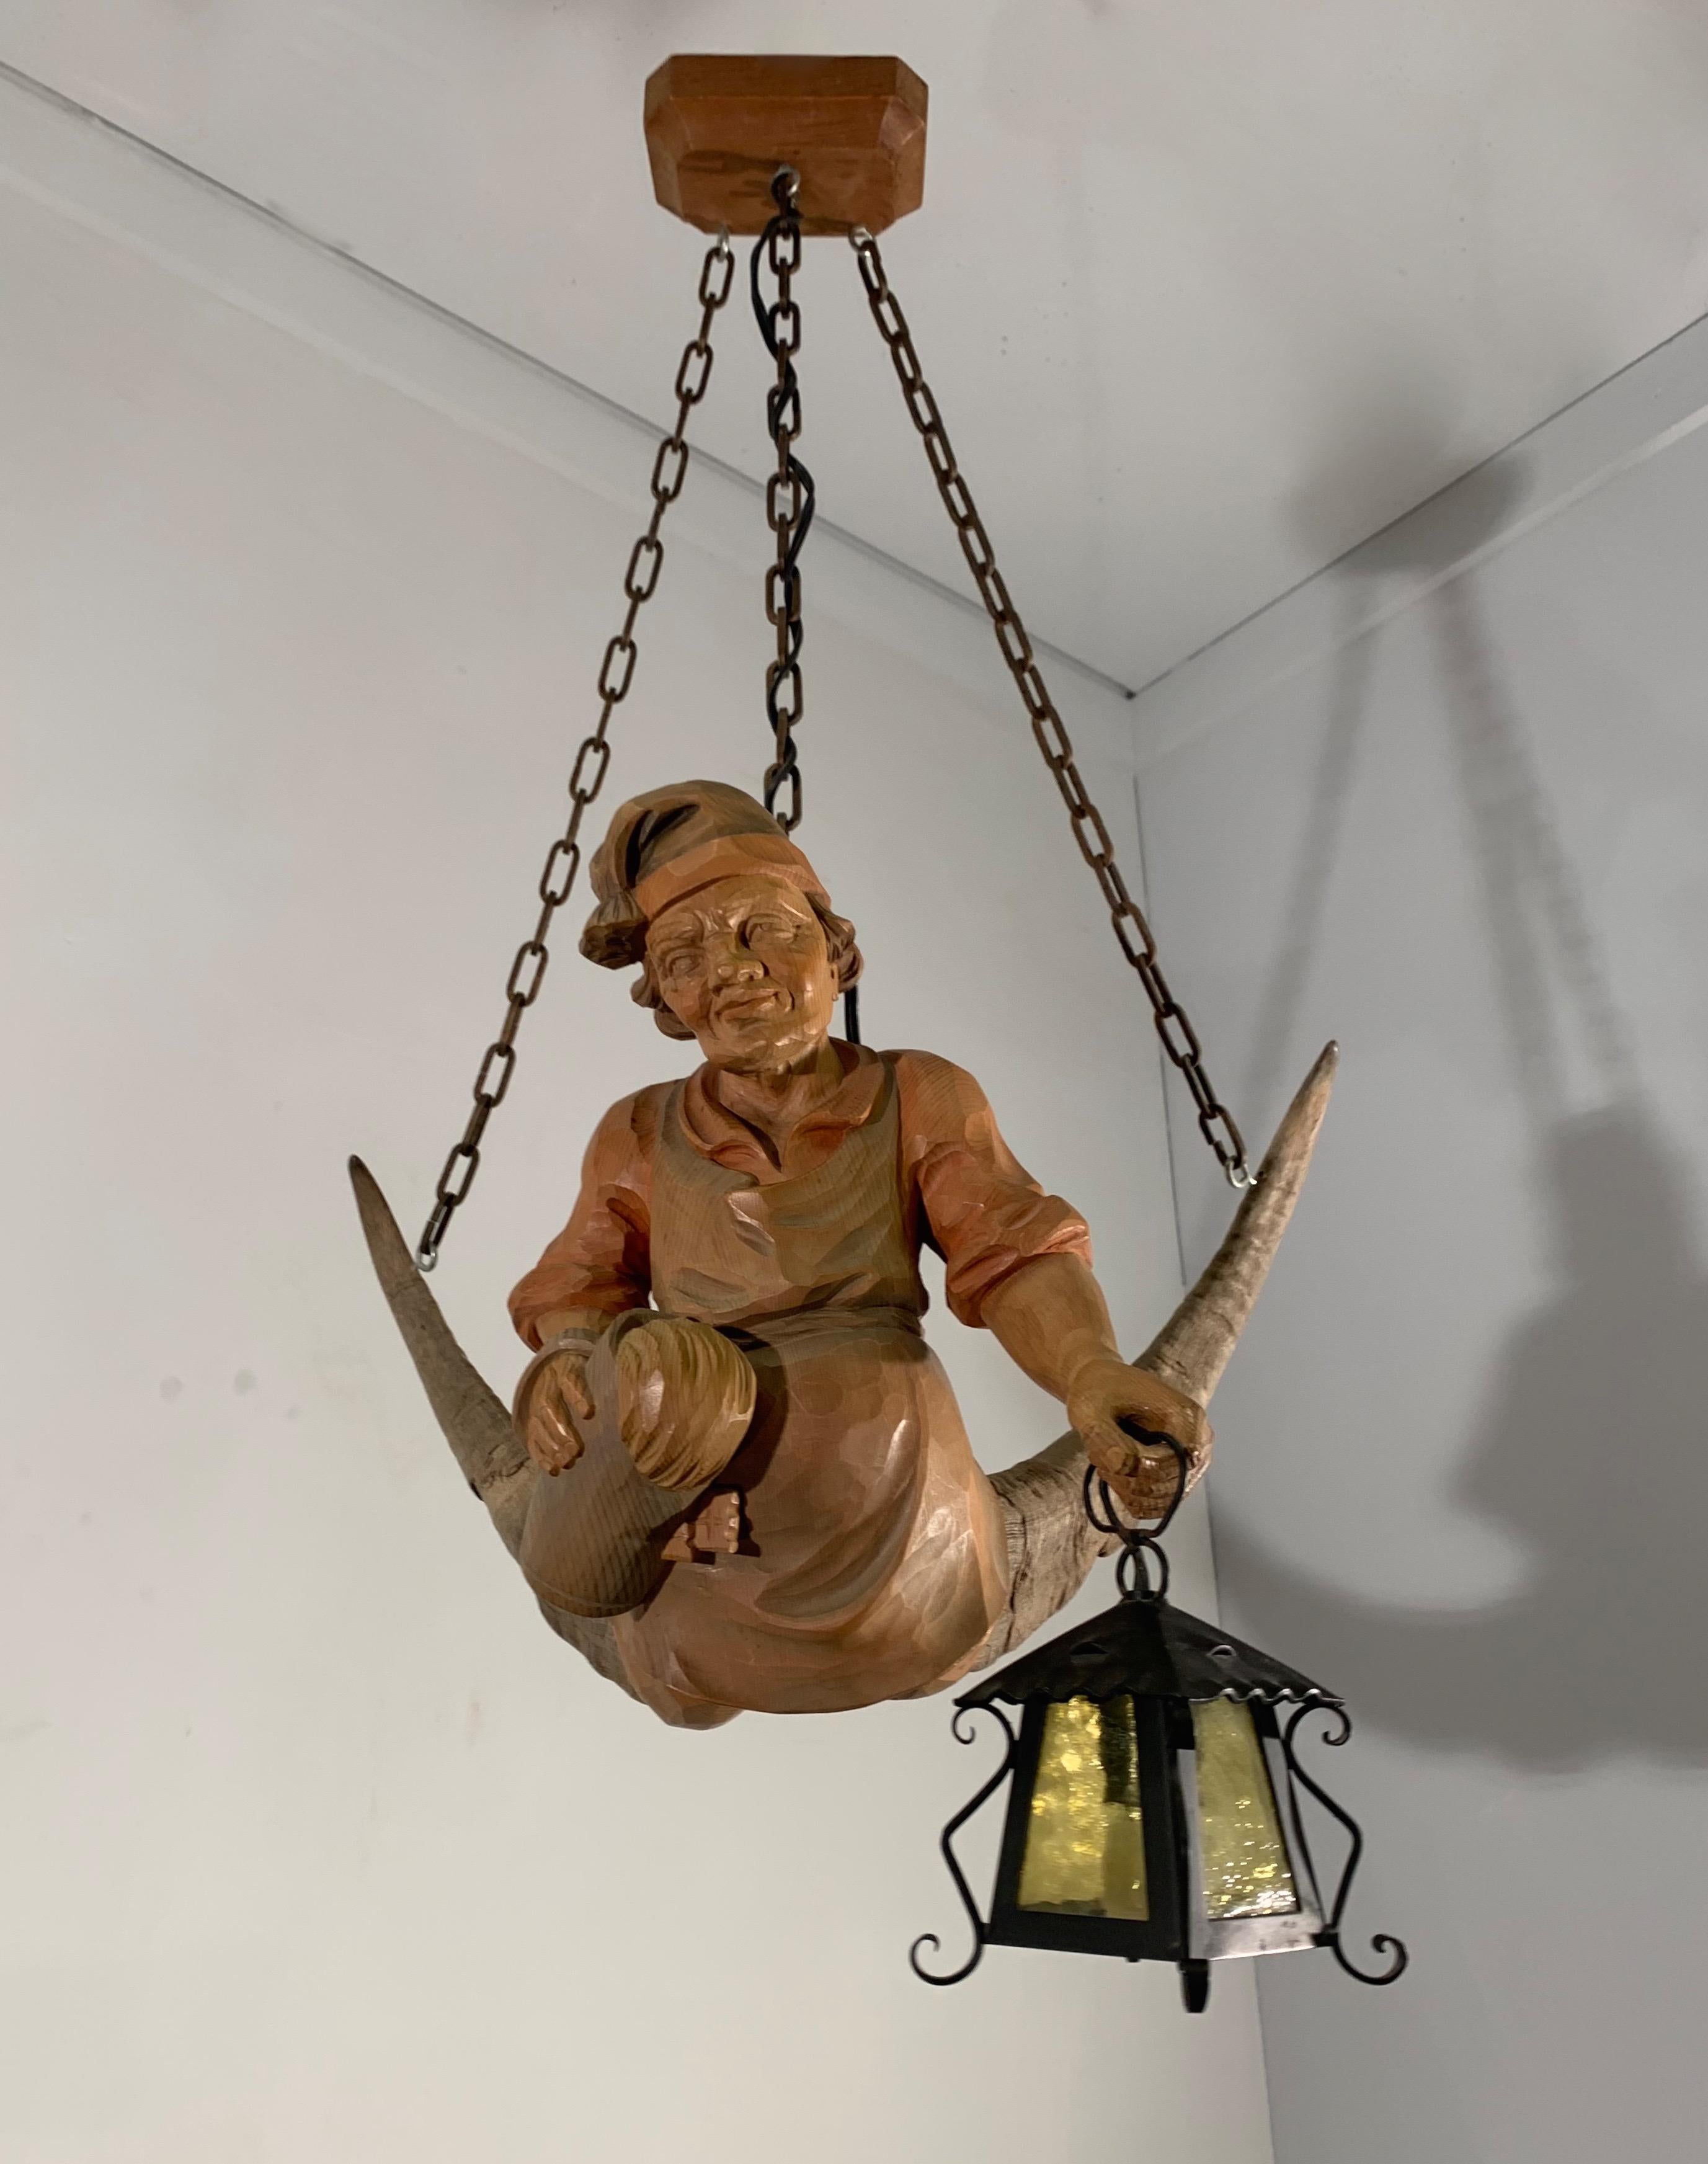 Rare and hand carved, beer serving landlord chandelier with real ibex horns.

If you are looking for a decorative light fixture for a bar, pub, tavern, restaurant, mancave or lodge then this remarkable and unique light fixture could be perfect for